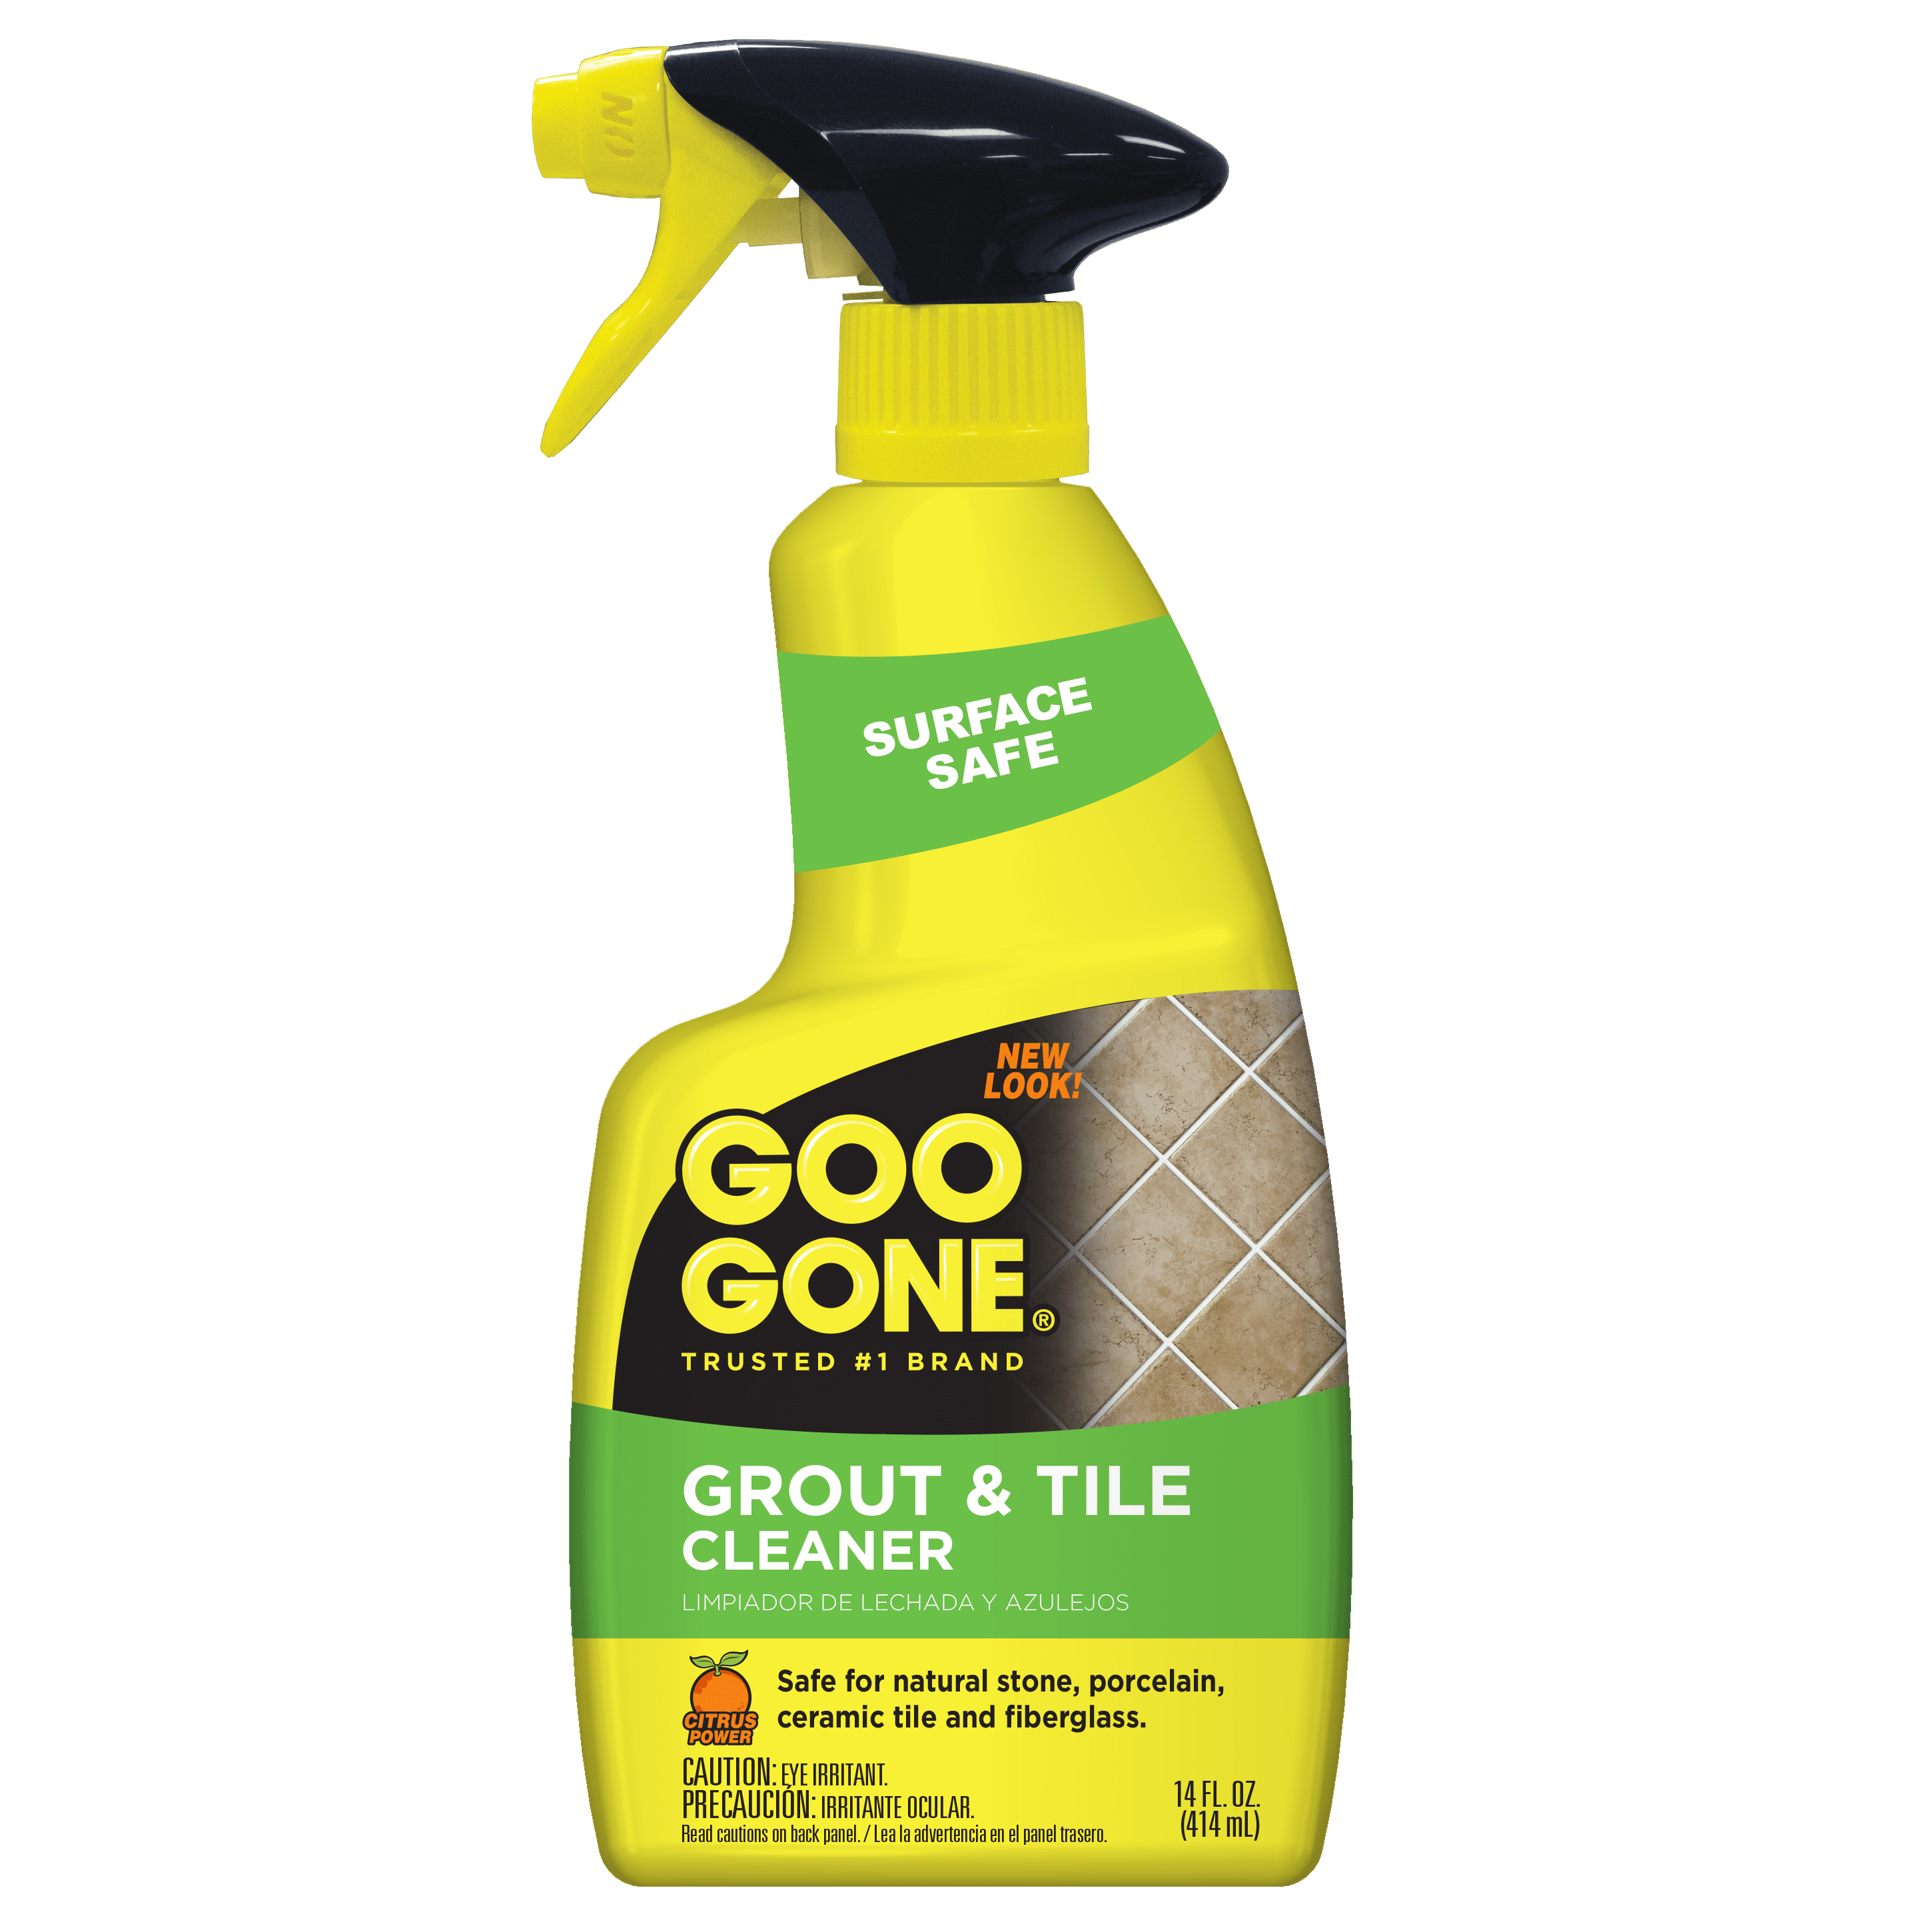 Granite Gold 24 oz. Grout Cleaner with Brush GG0371 - The Home Depot